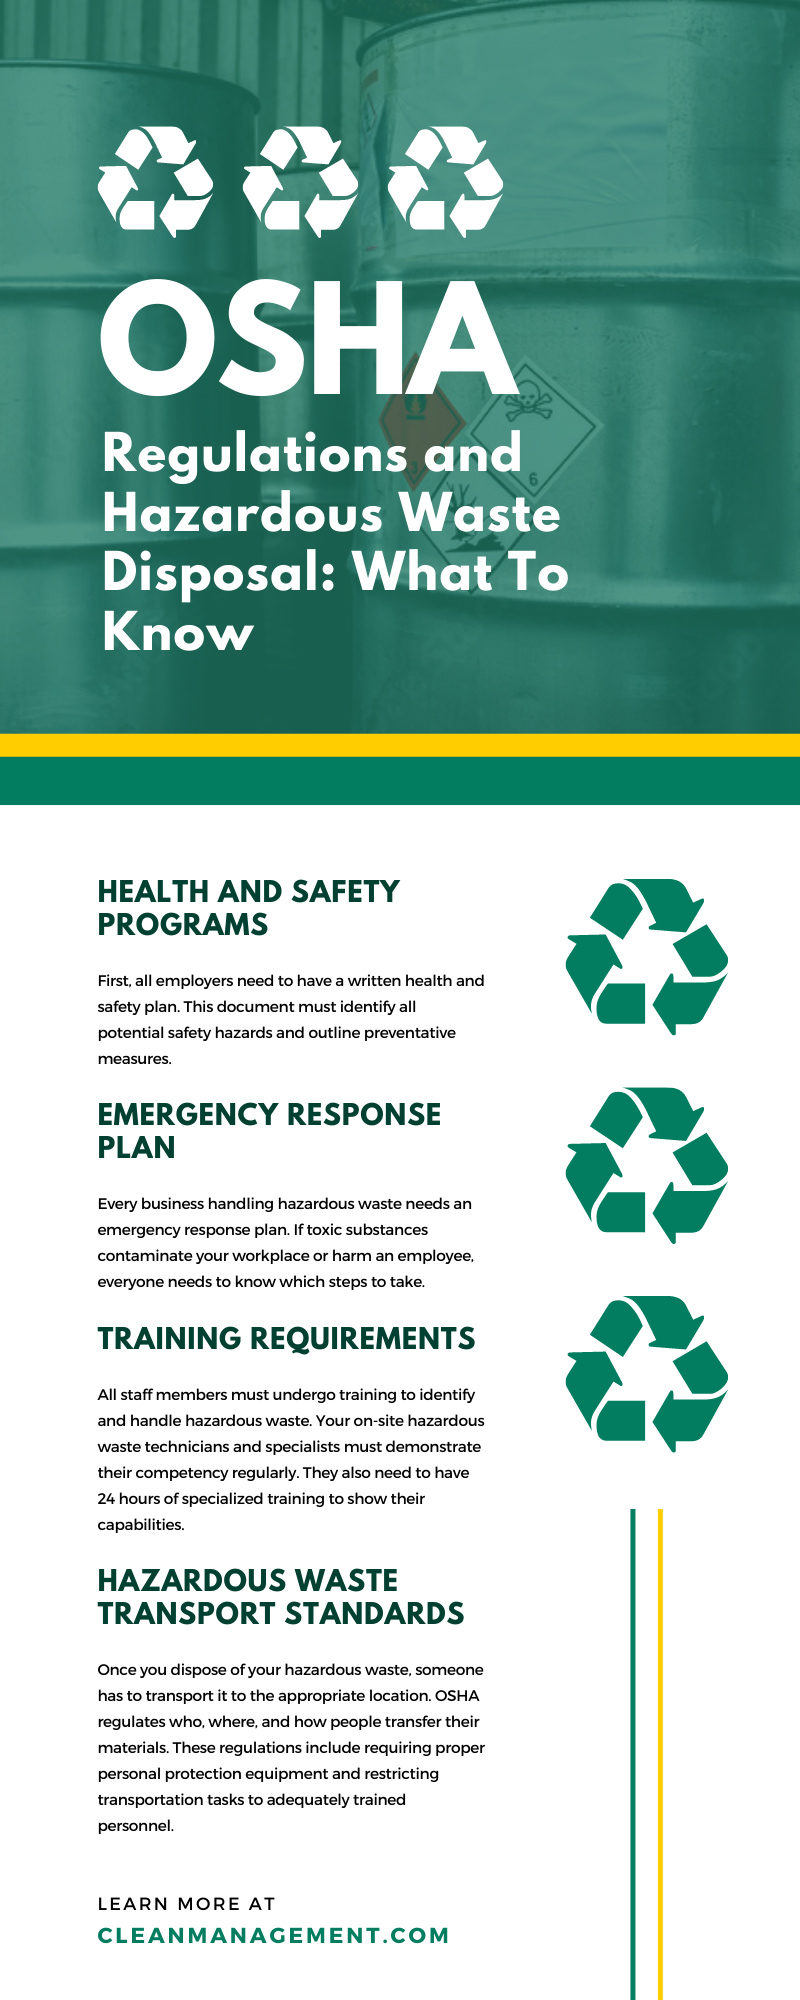 OSHA Regulations and Hazardous Waste Disposal: What To Know